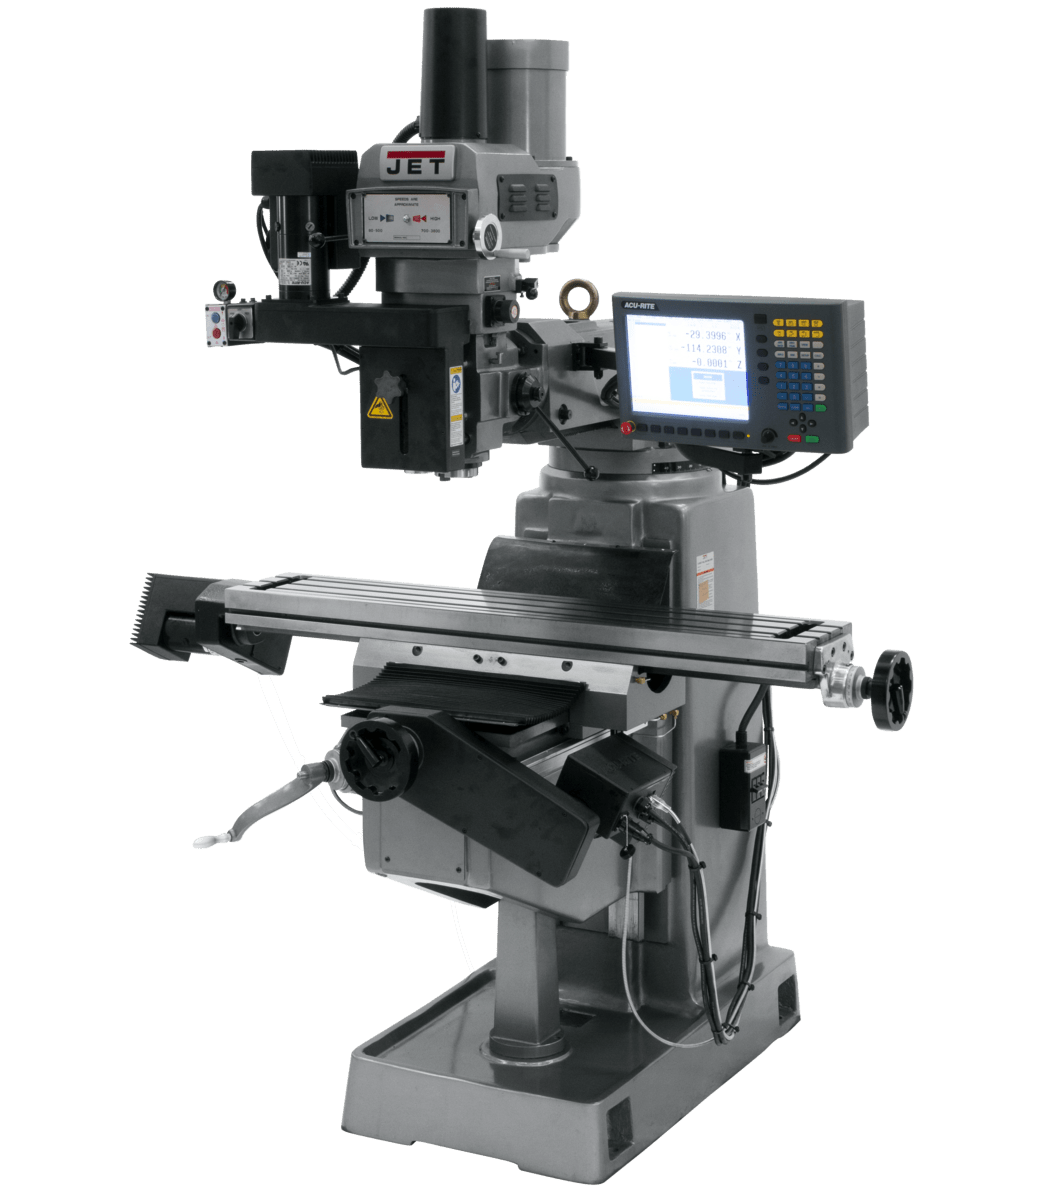 JTM-4VS Mill With 3-Axis ACU-RITE G-2 MILLPWR CNC With Air Powered Draw Bar - Jet